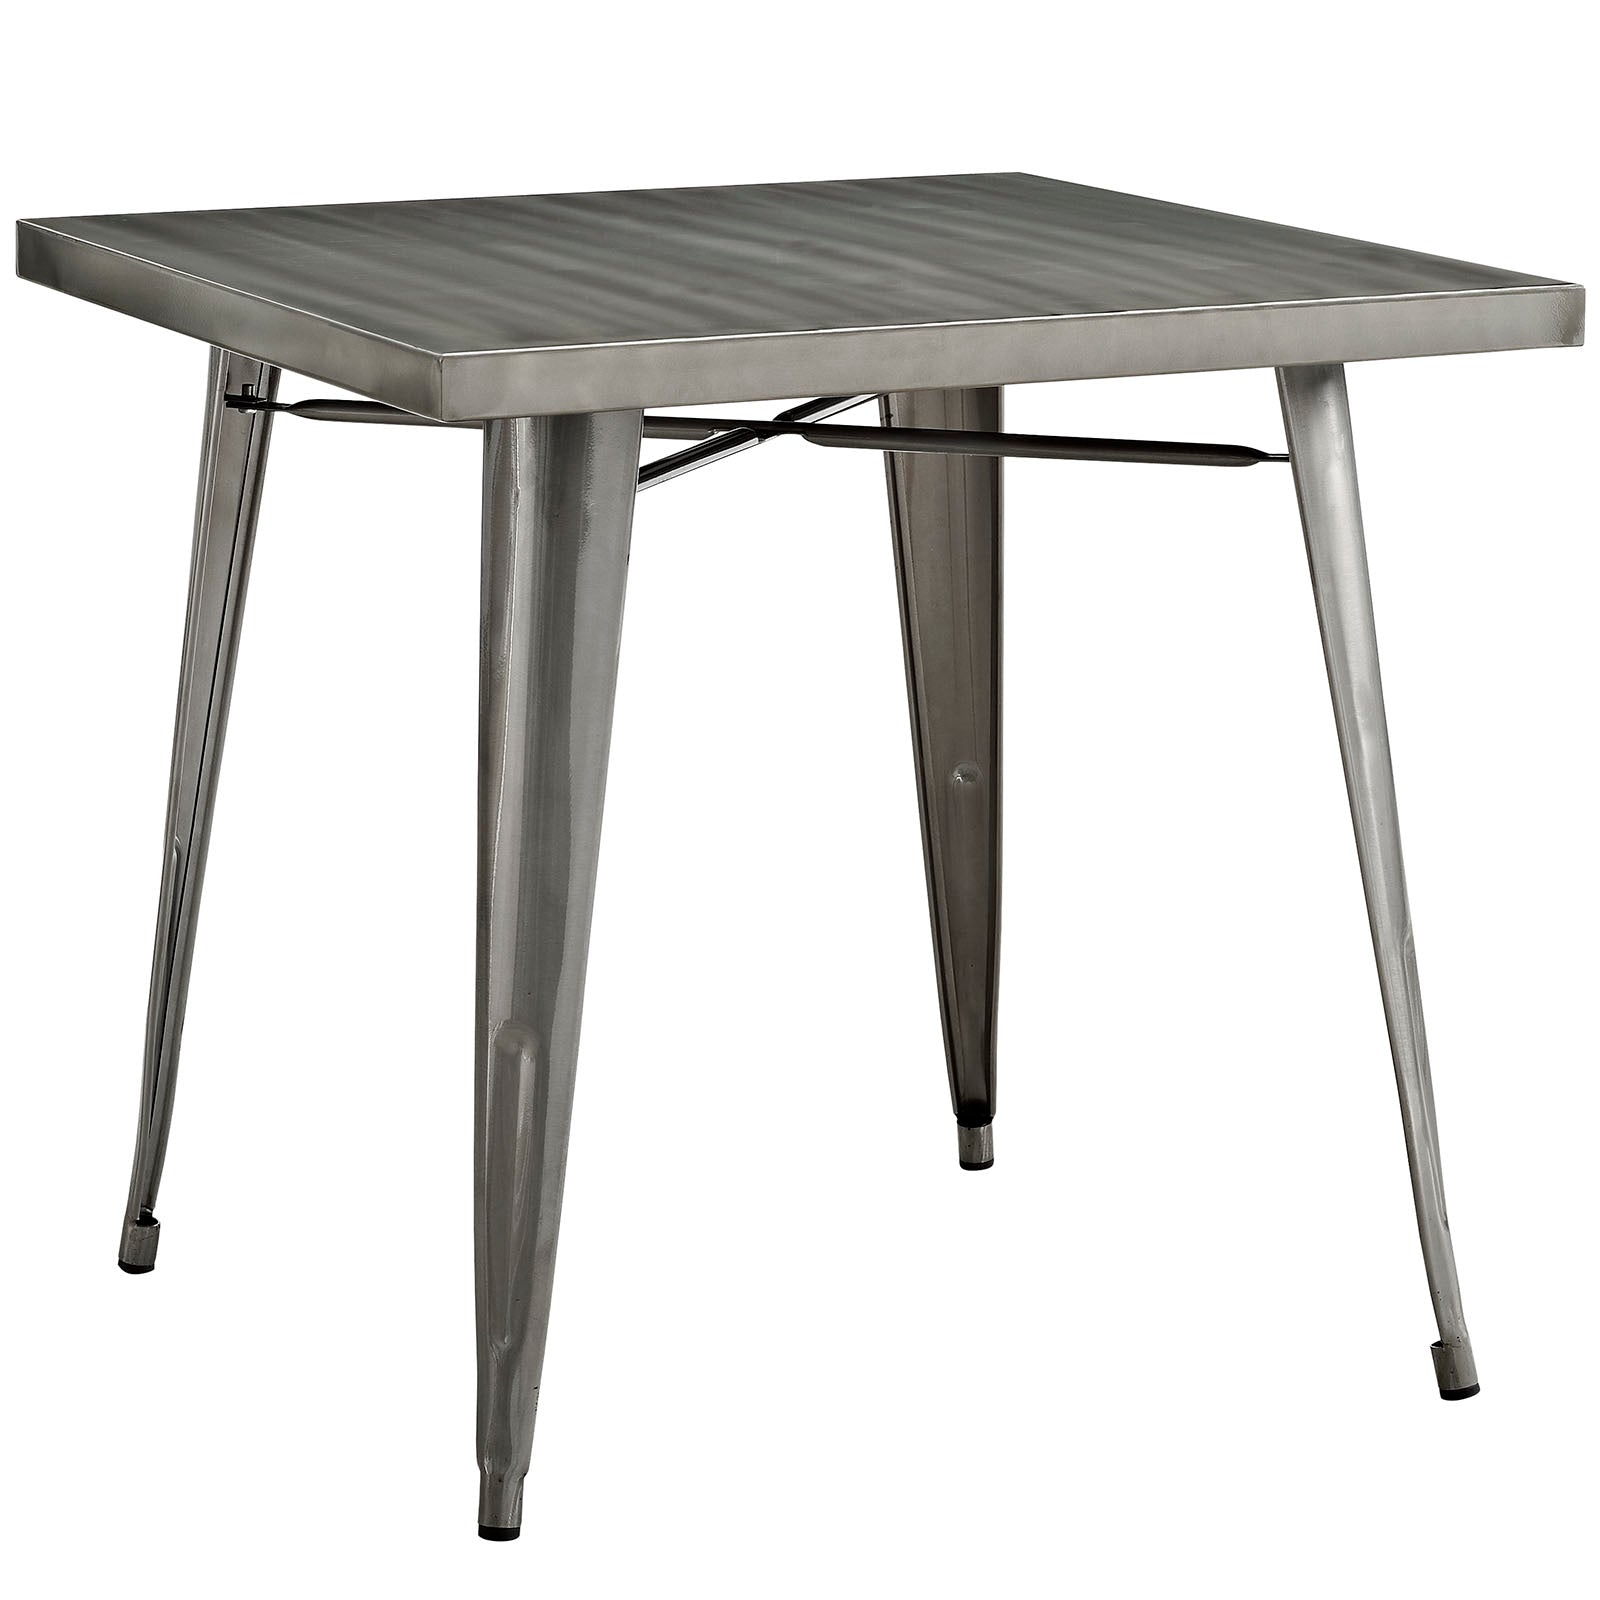 Alacrity Square Metal Dining Table - East Shore Modern Home Furnishings